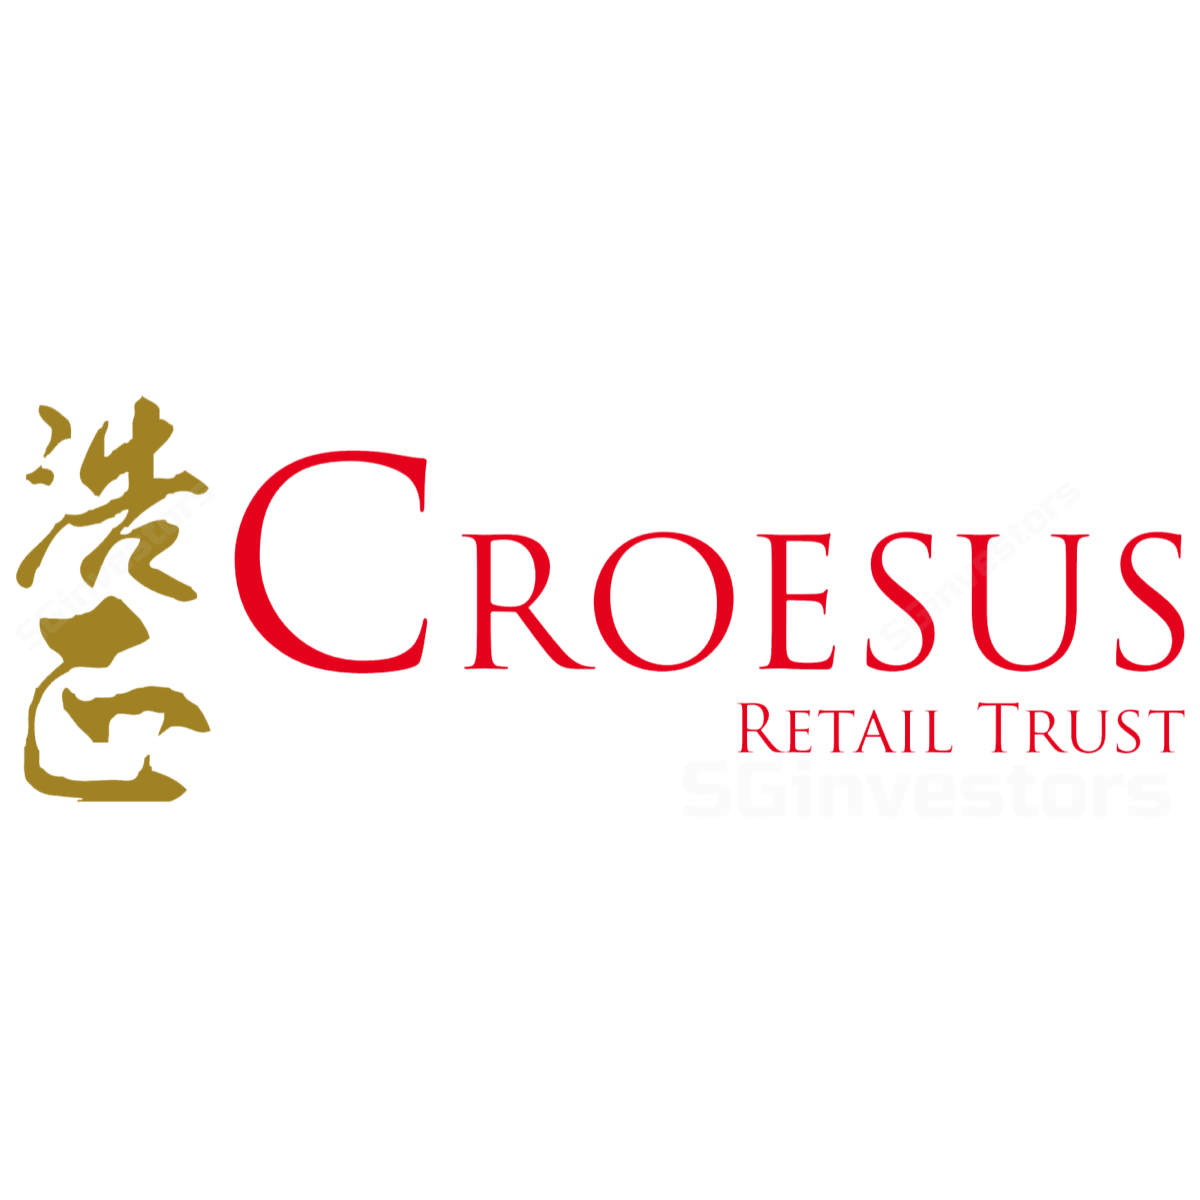 Croesus Retail Trust - Phillip Securities 2017-05-17: Multiple Drivers Of Growth For FY17/FY18